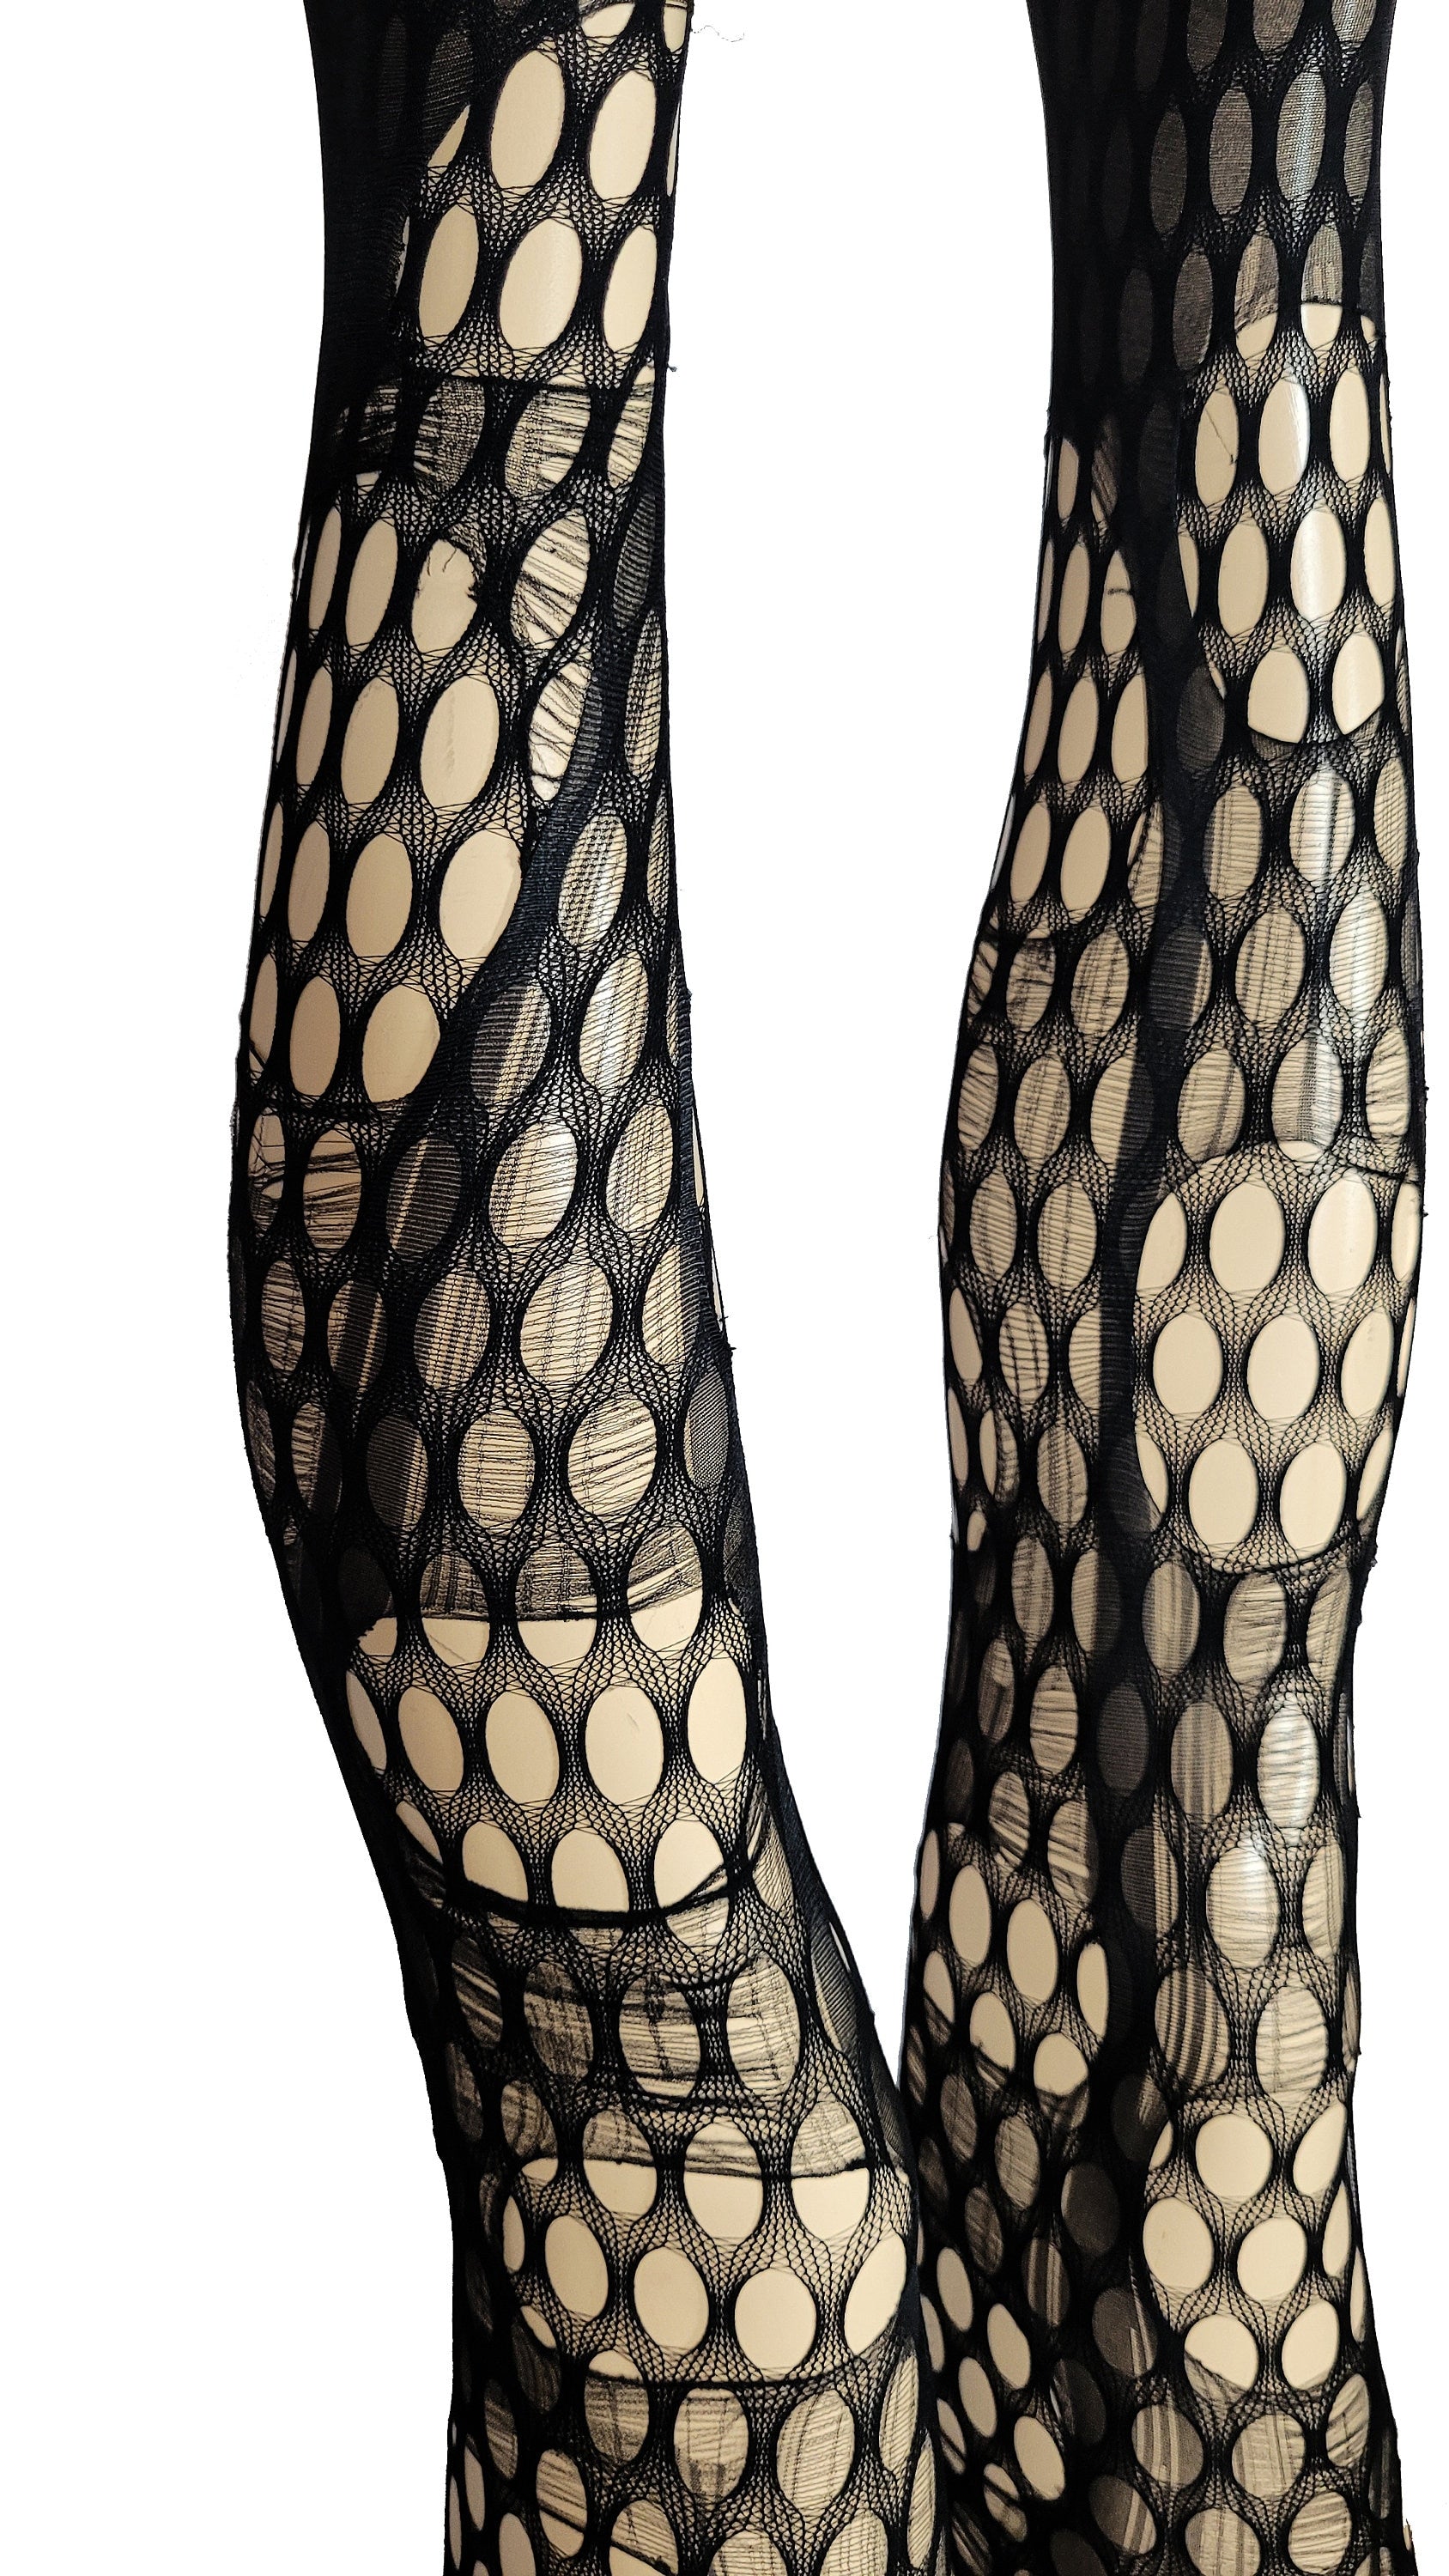 Double layered Black | Red tattered & torn fishnet tights